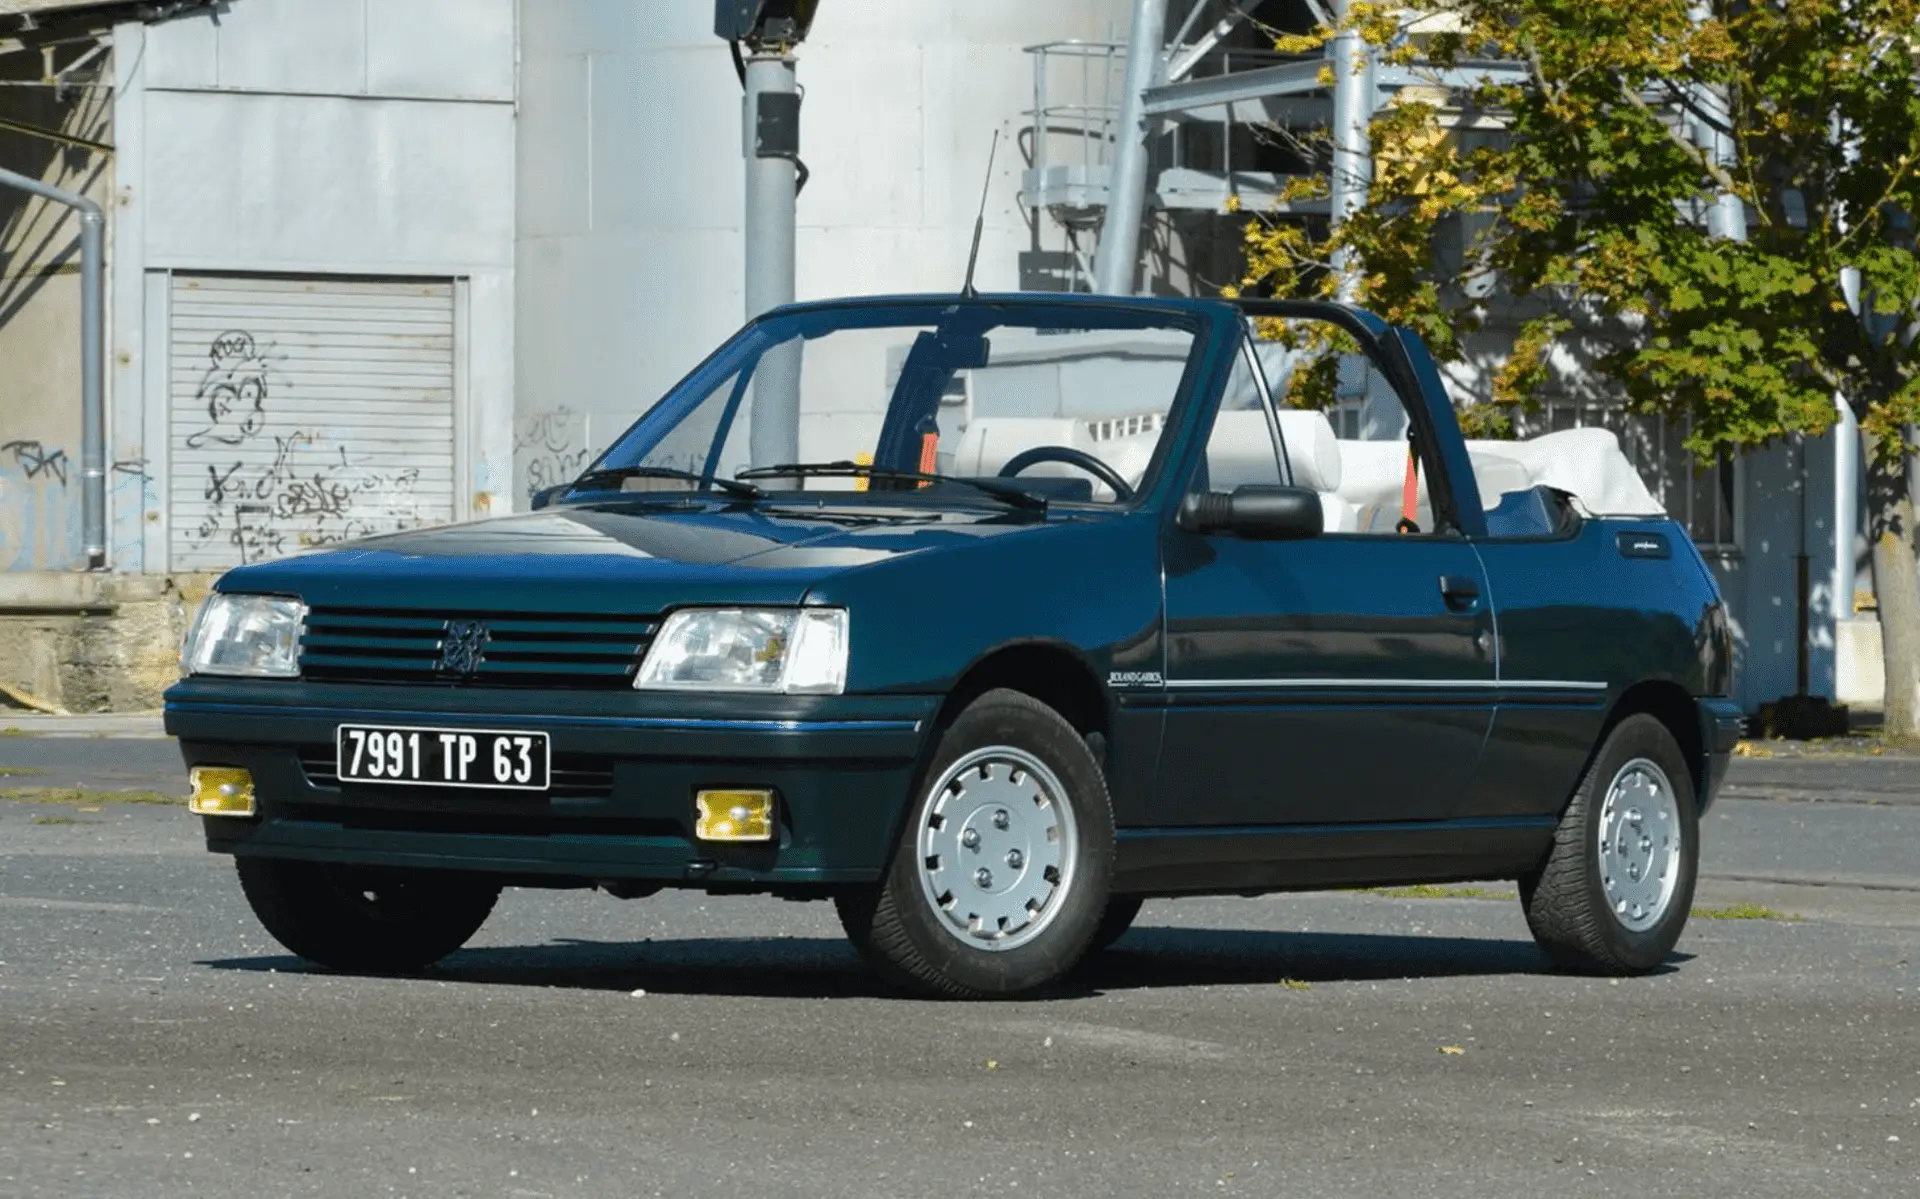 A very special auction. When Peugeot, Citroën and Panhard weren’t Stellantis